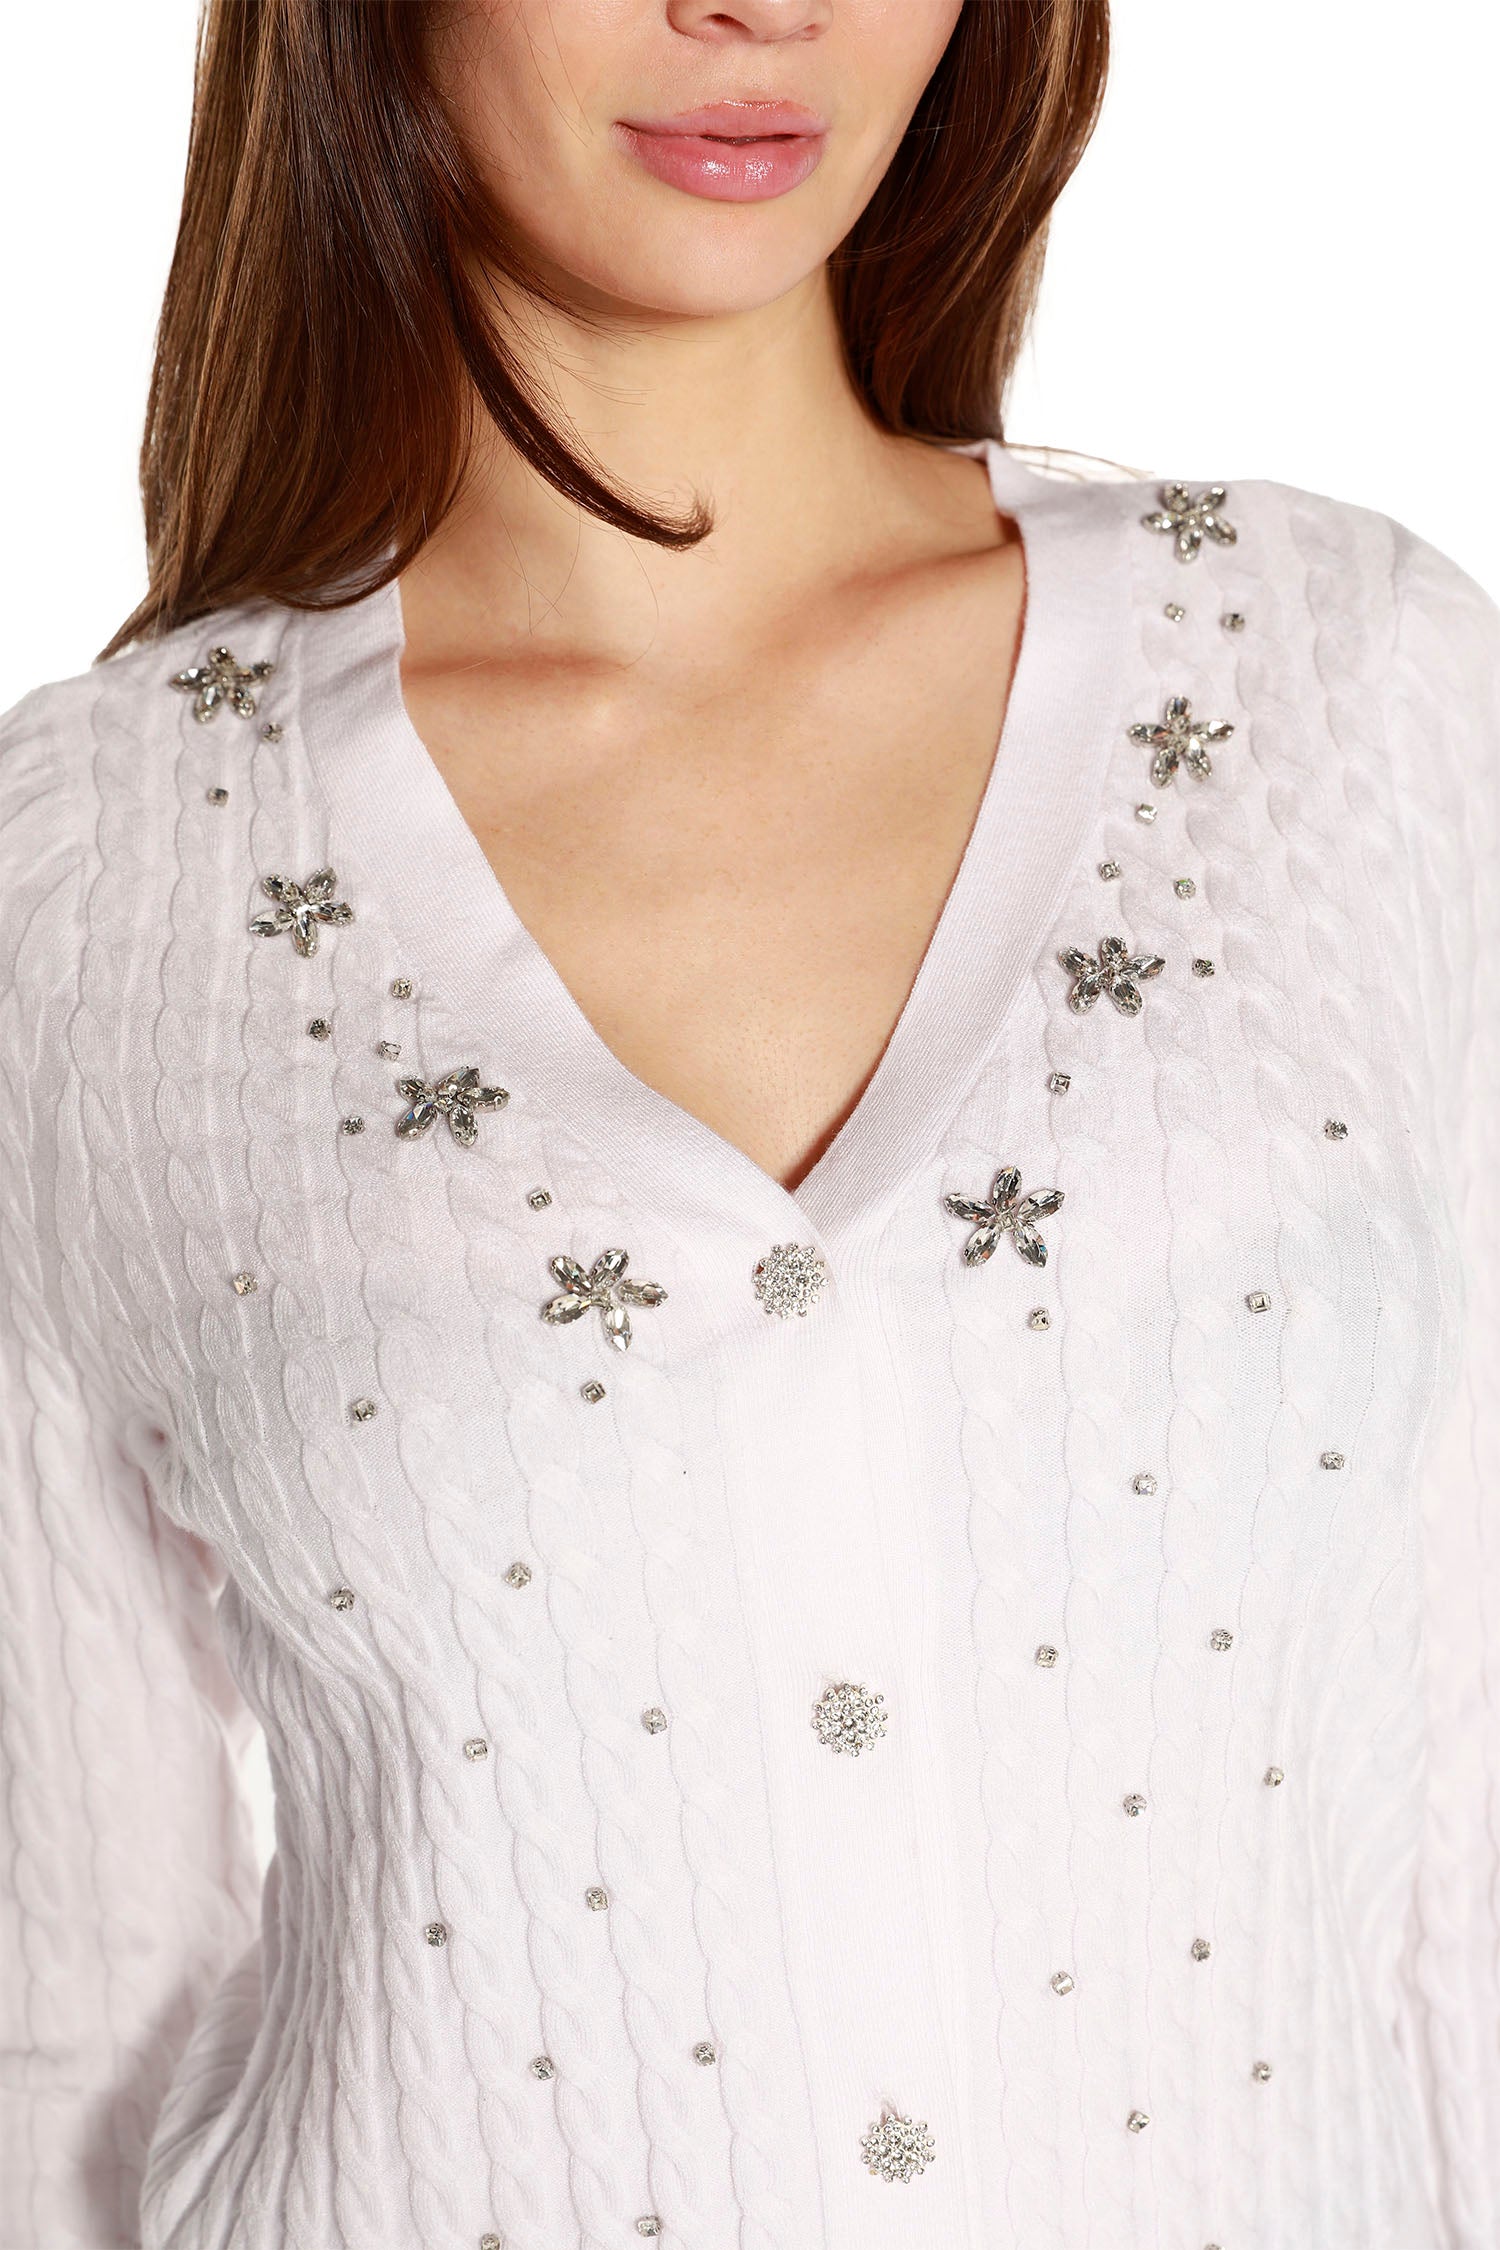 Women’s Rhinestone Embellished Delicate Cable Knit Cropped Cardigan